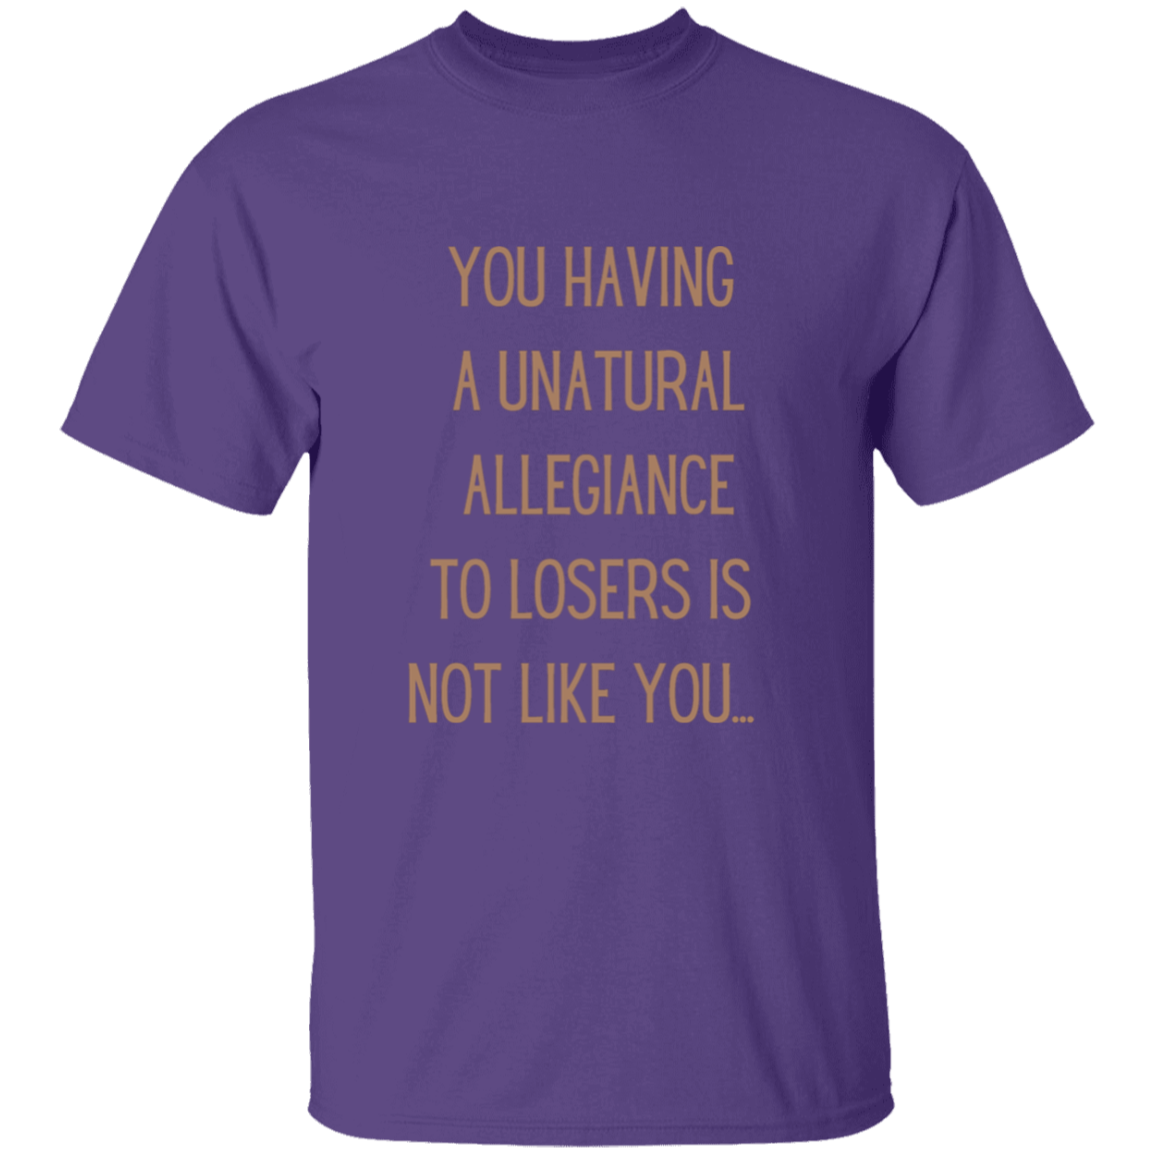 Katt said it best: You having a unatural allegiance to losers is not like you…  T-Shirt